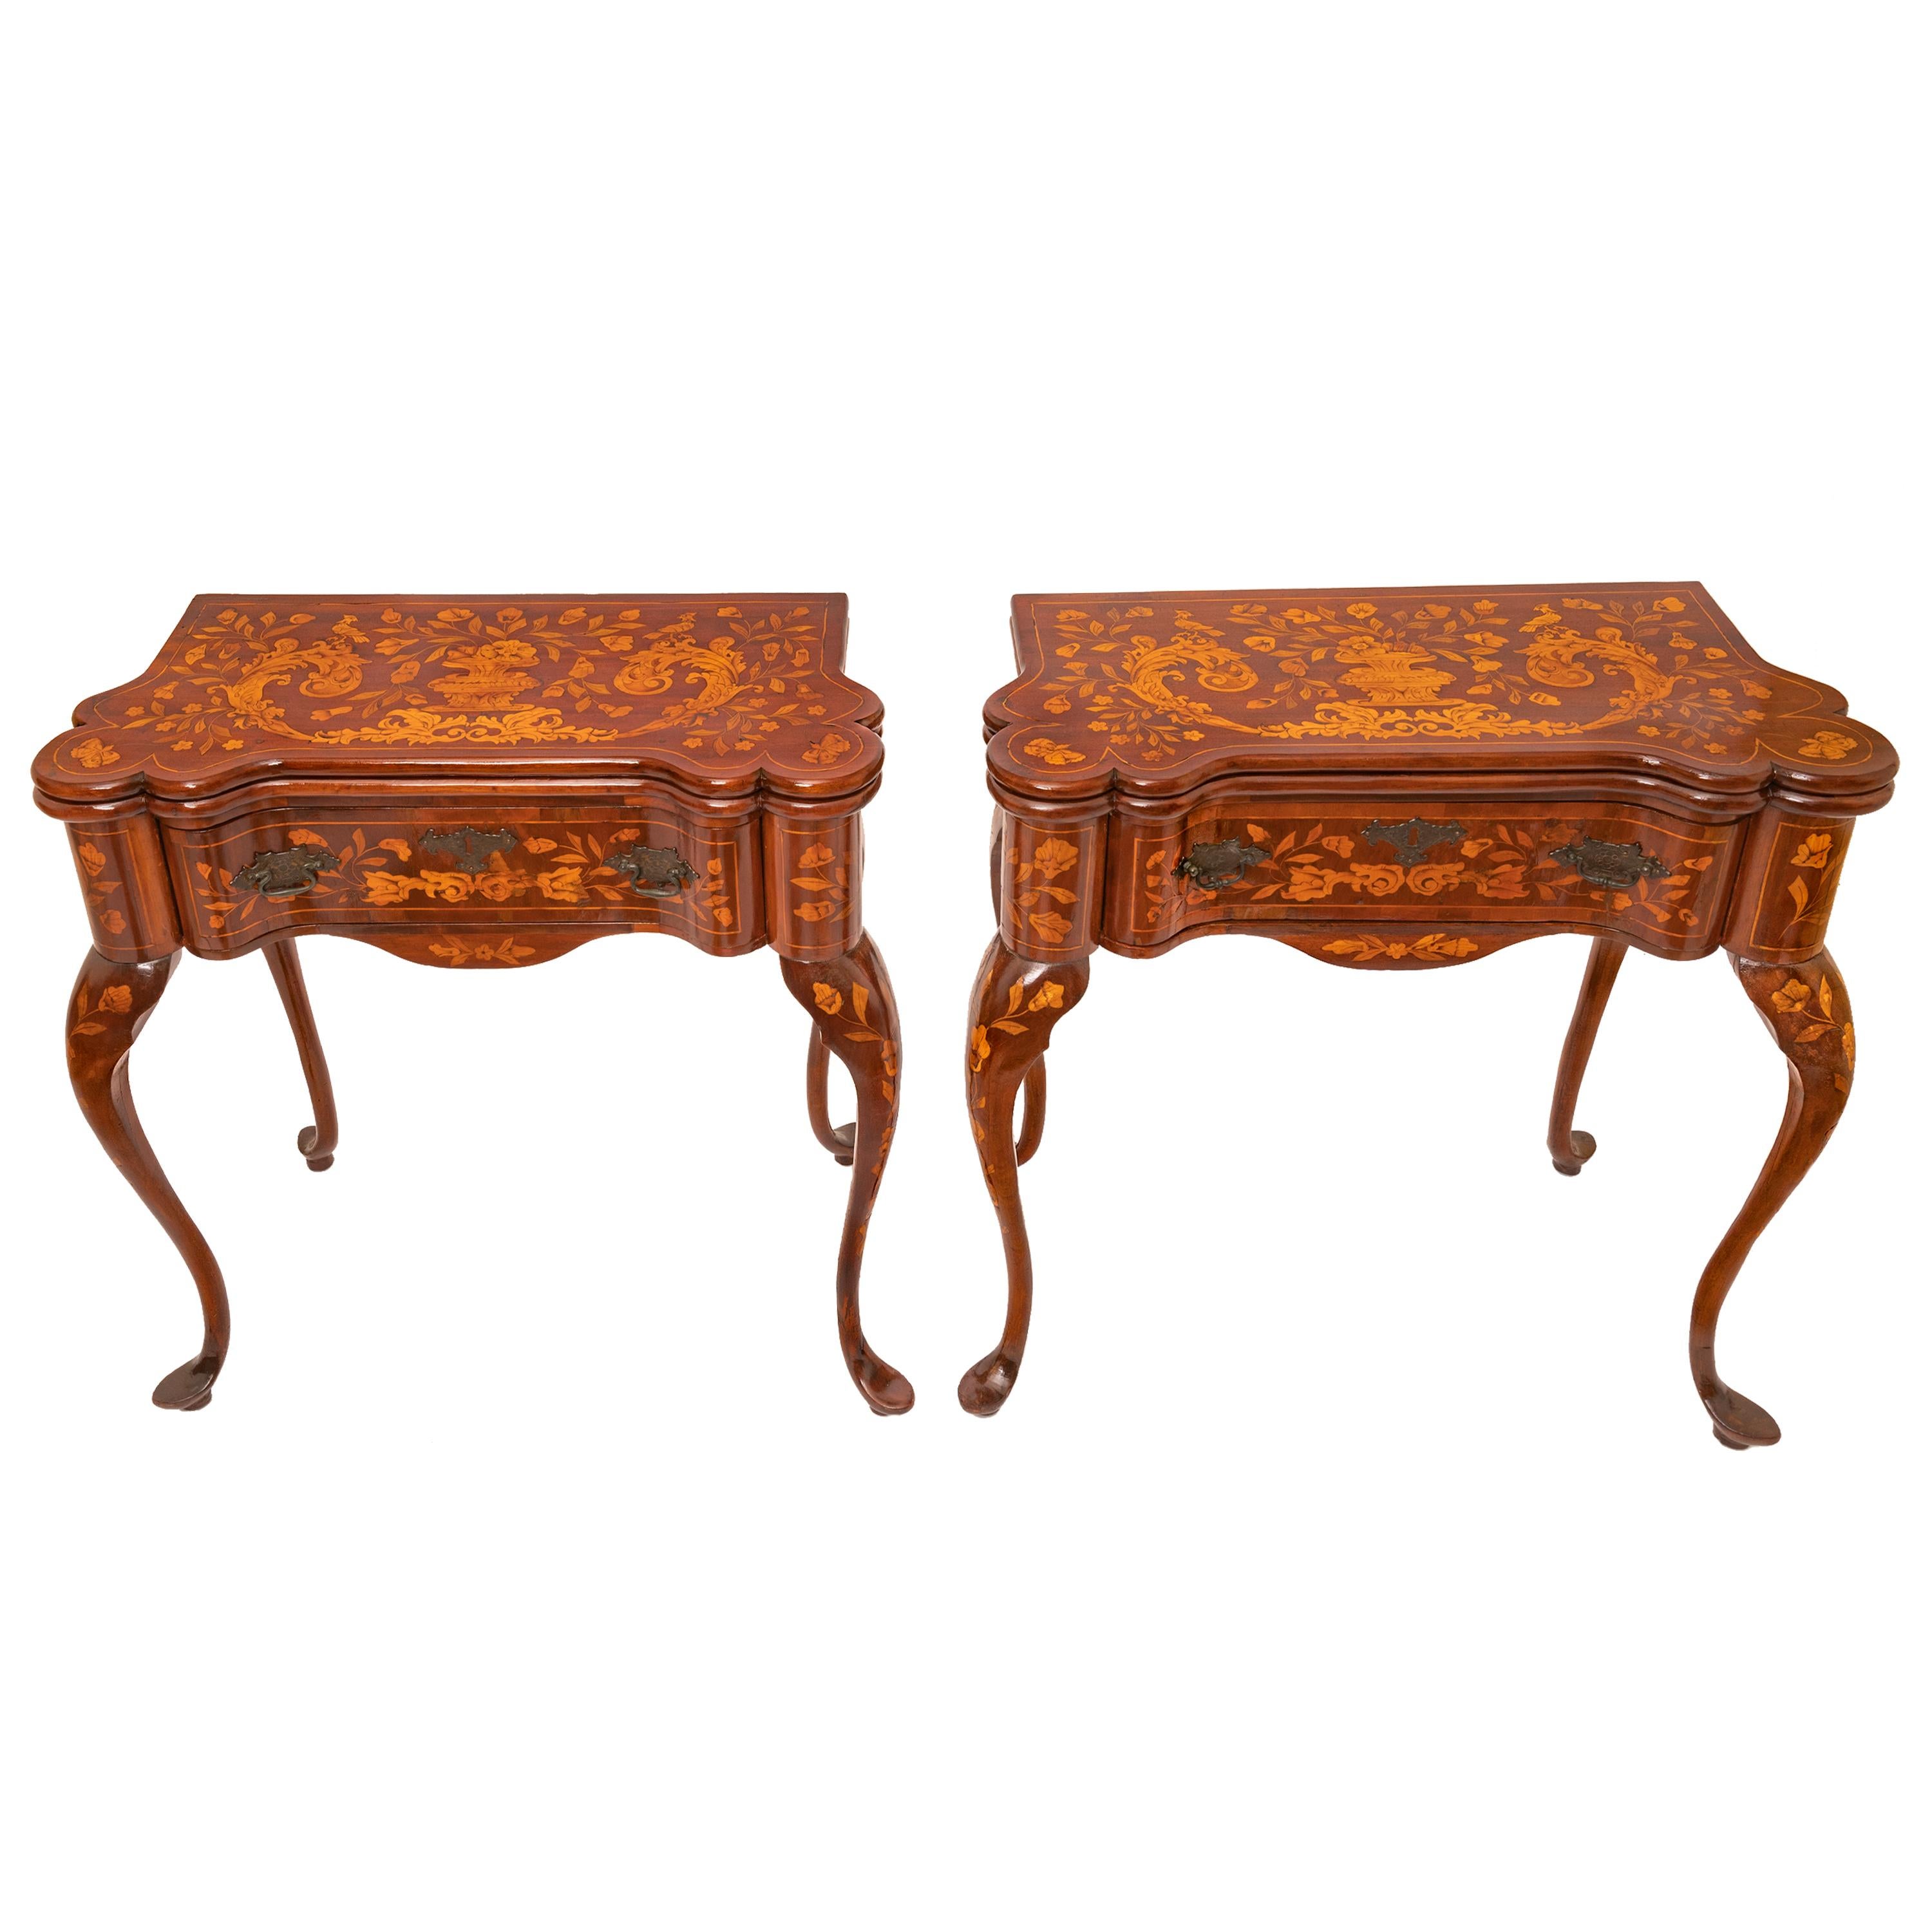 An exceptional & rare pair of antique early 19th century Dutch marquetry walnut card or game tables, circa 1820.
Each table is of reverse serpentine shape and having a hinged fold over top, both tops are sumptuously inlaid with a central flowering